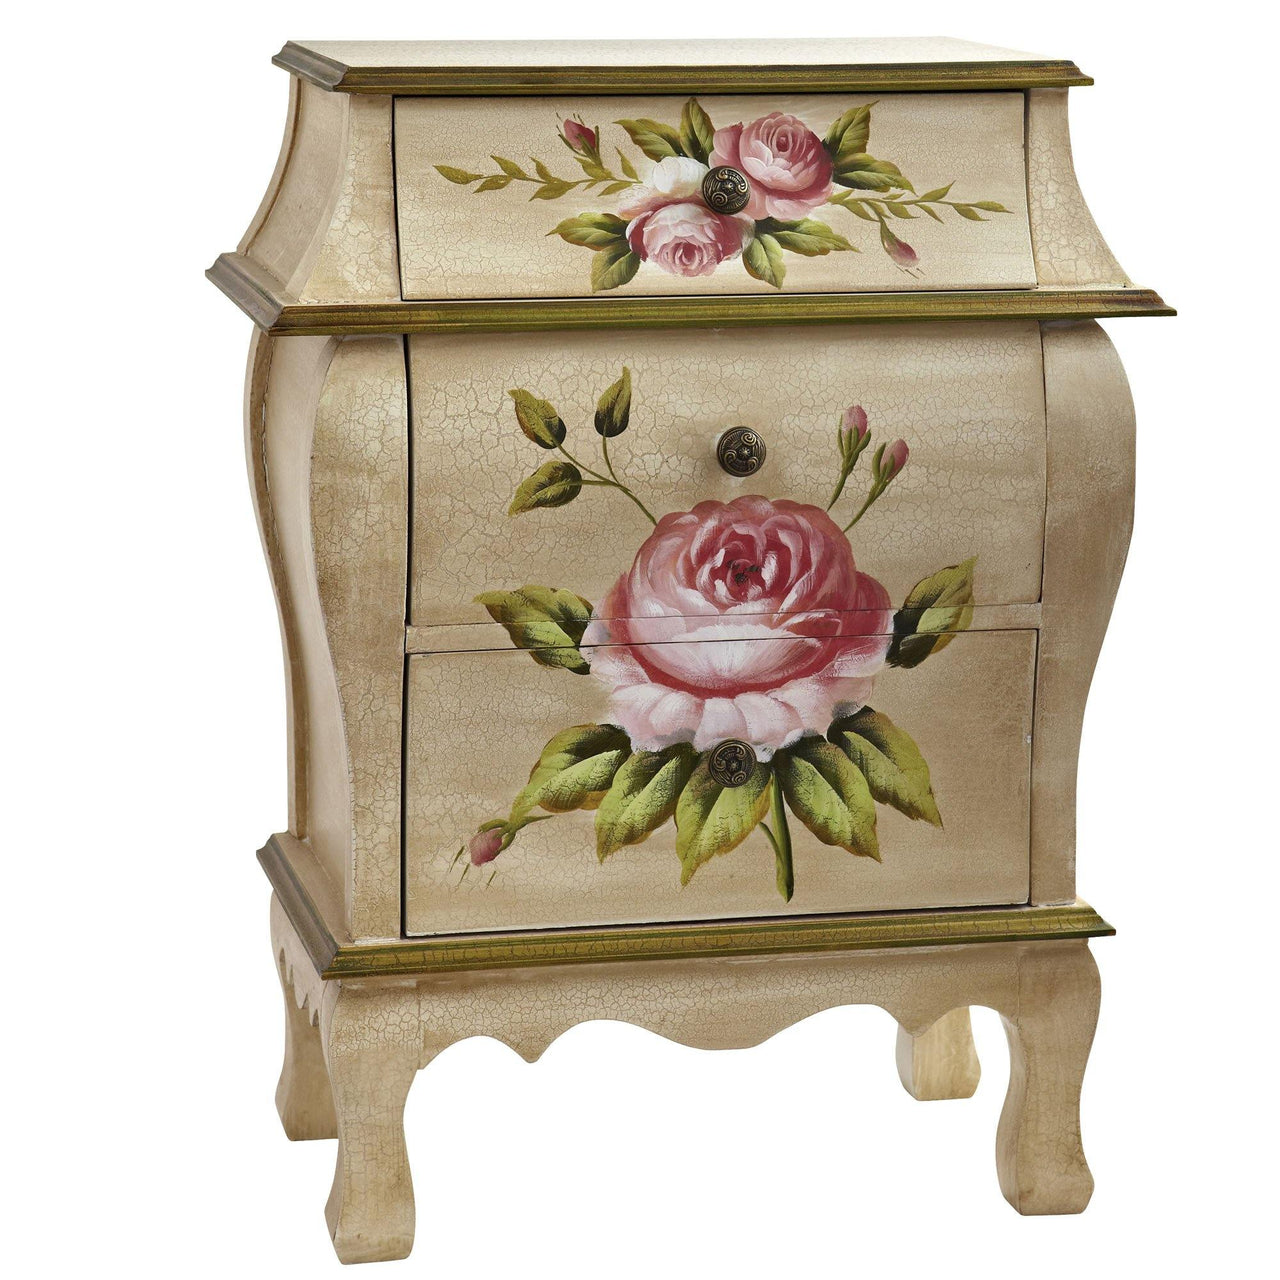 Antique Night Stand W/Floral Art - The Fox Decor